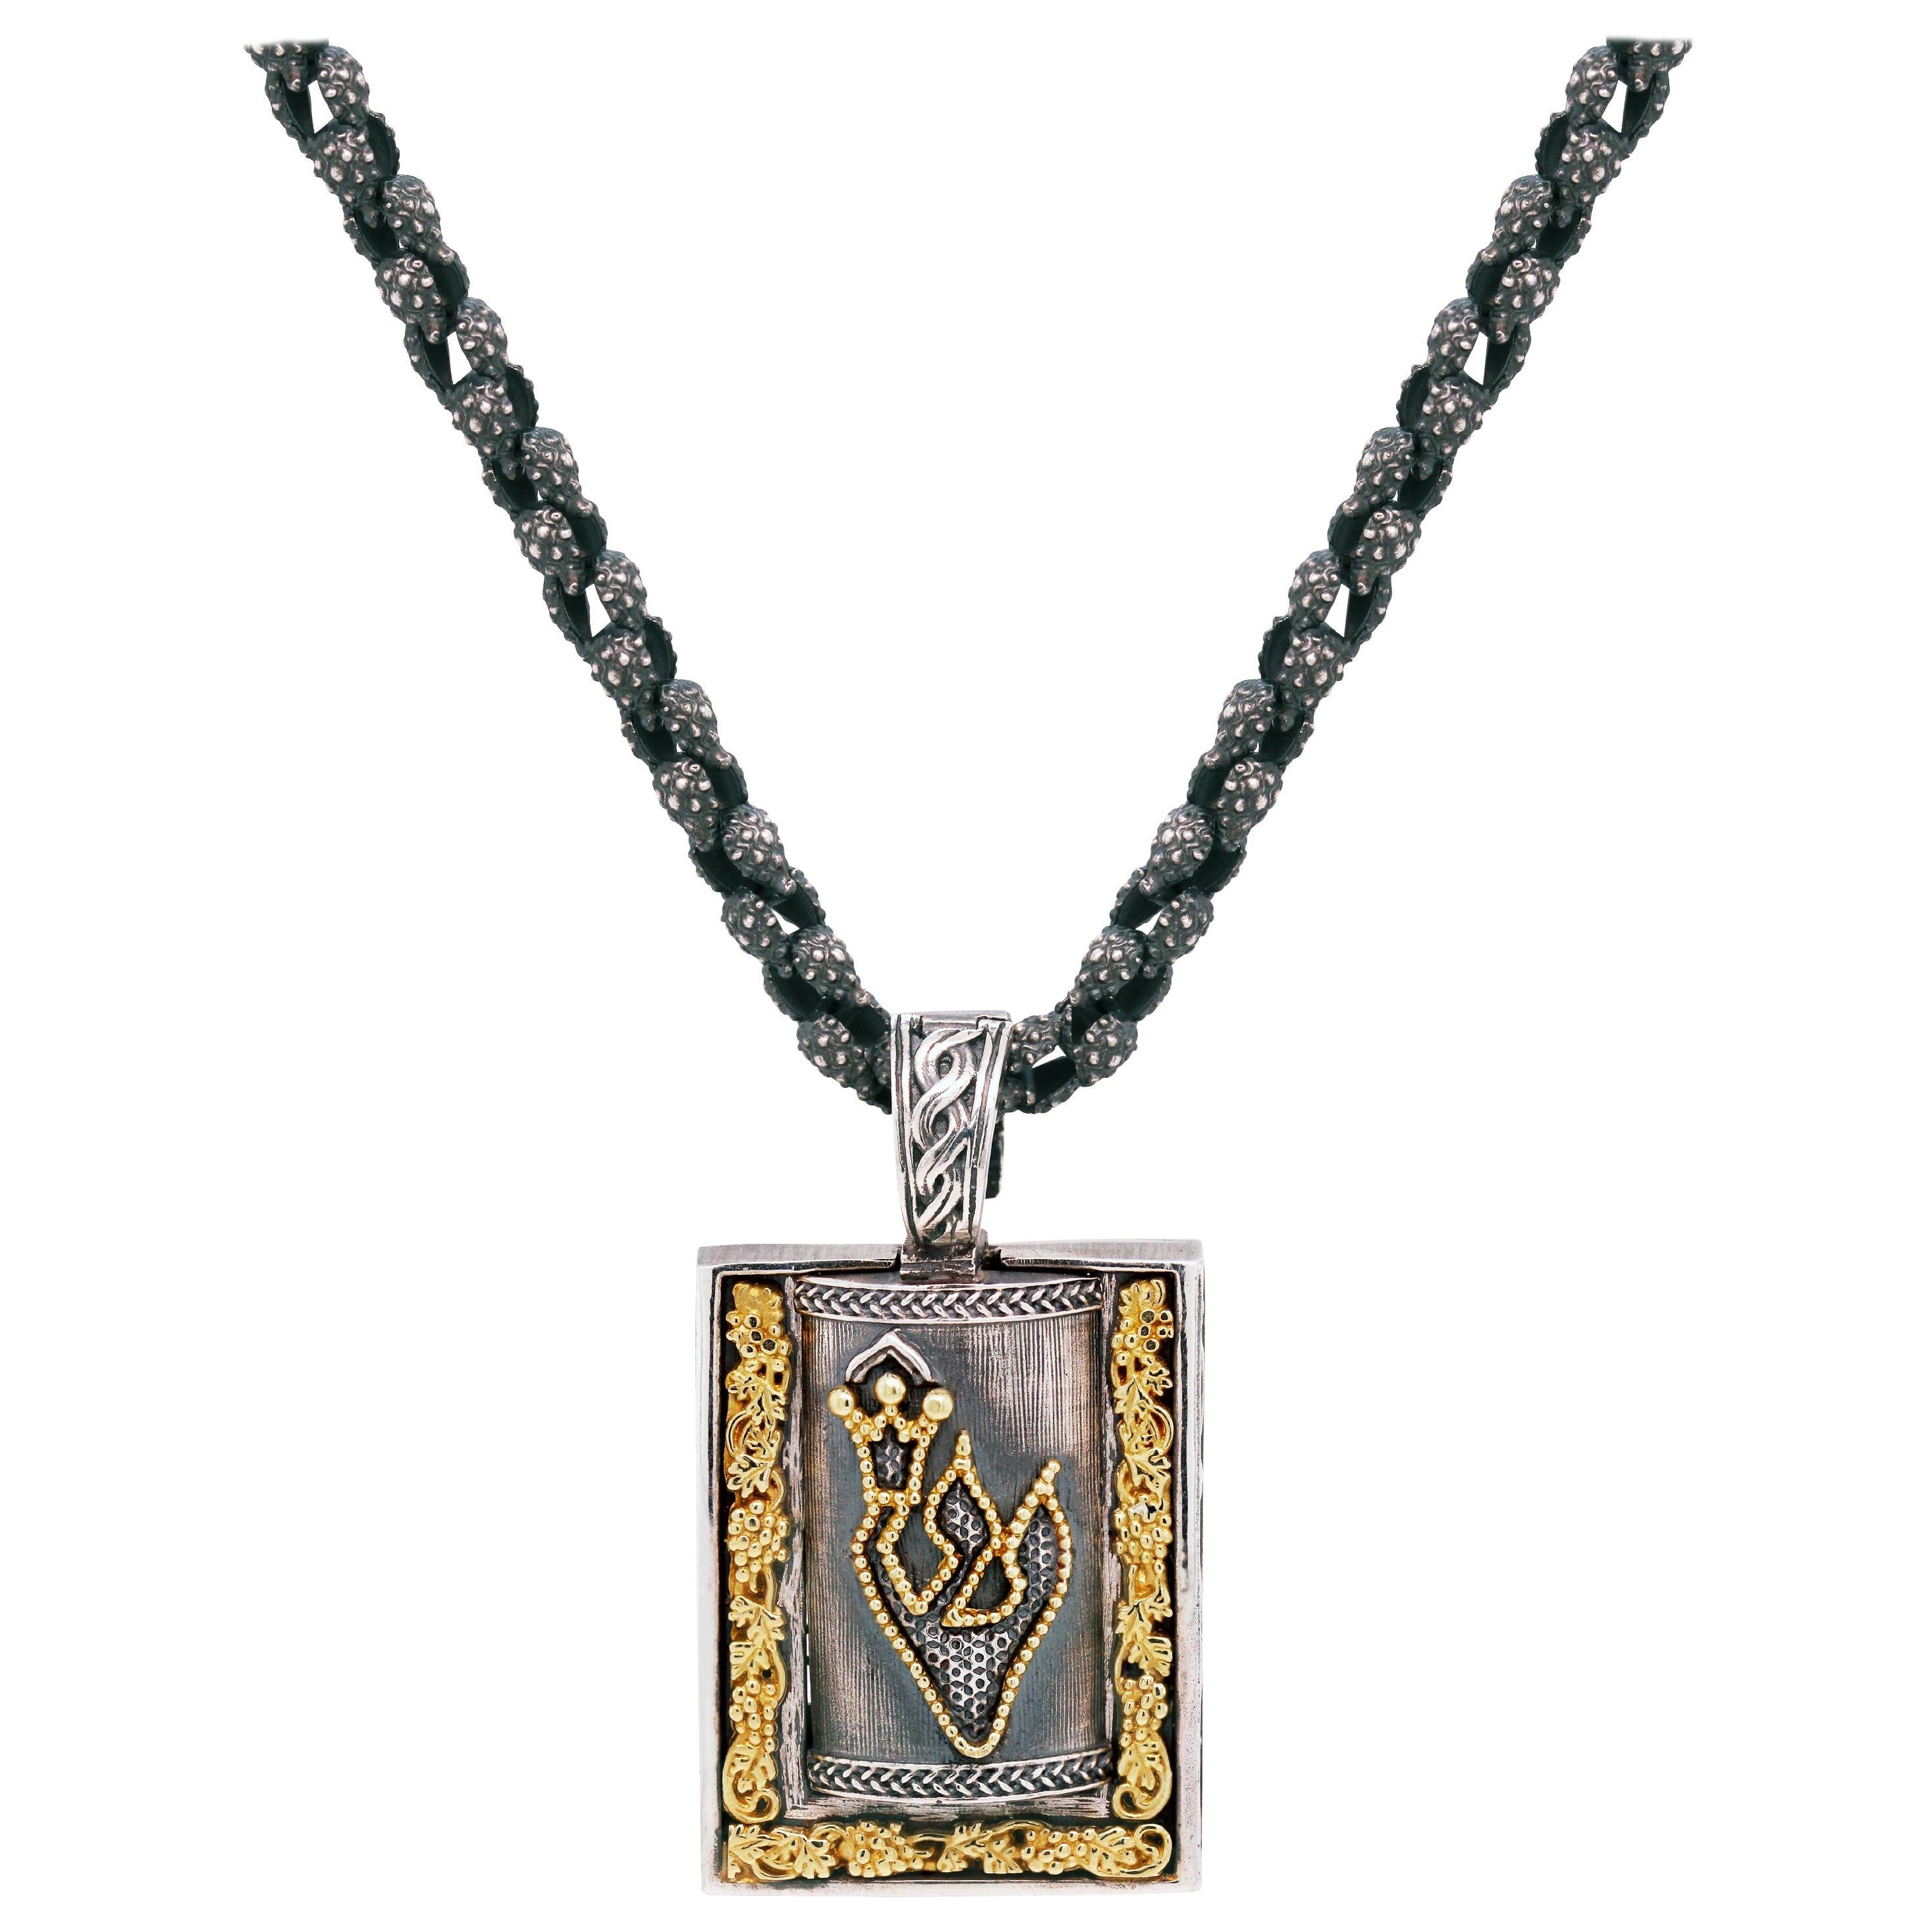 Silver and Gold Jewish Mezuzah Pendant Necklace with Chain by Stambolian

Pendant is a locket that opens to store a prayer. This state-of-the-art Mezuzah is finished in the Stambolian Aged Silver, the yellow is solid 18K Gold.

Chain comes standard